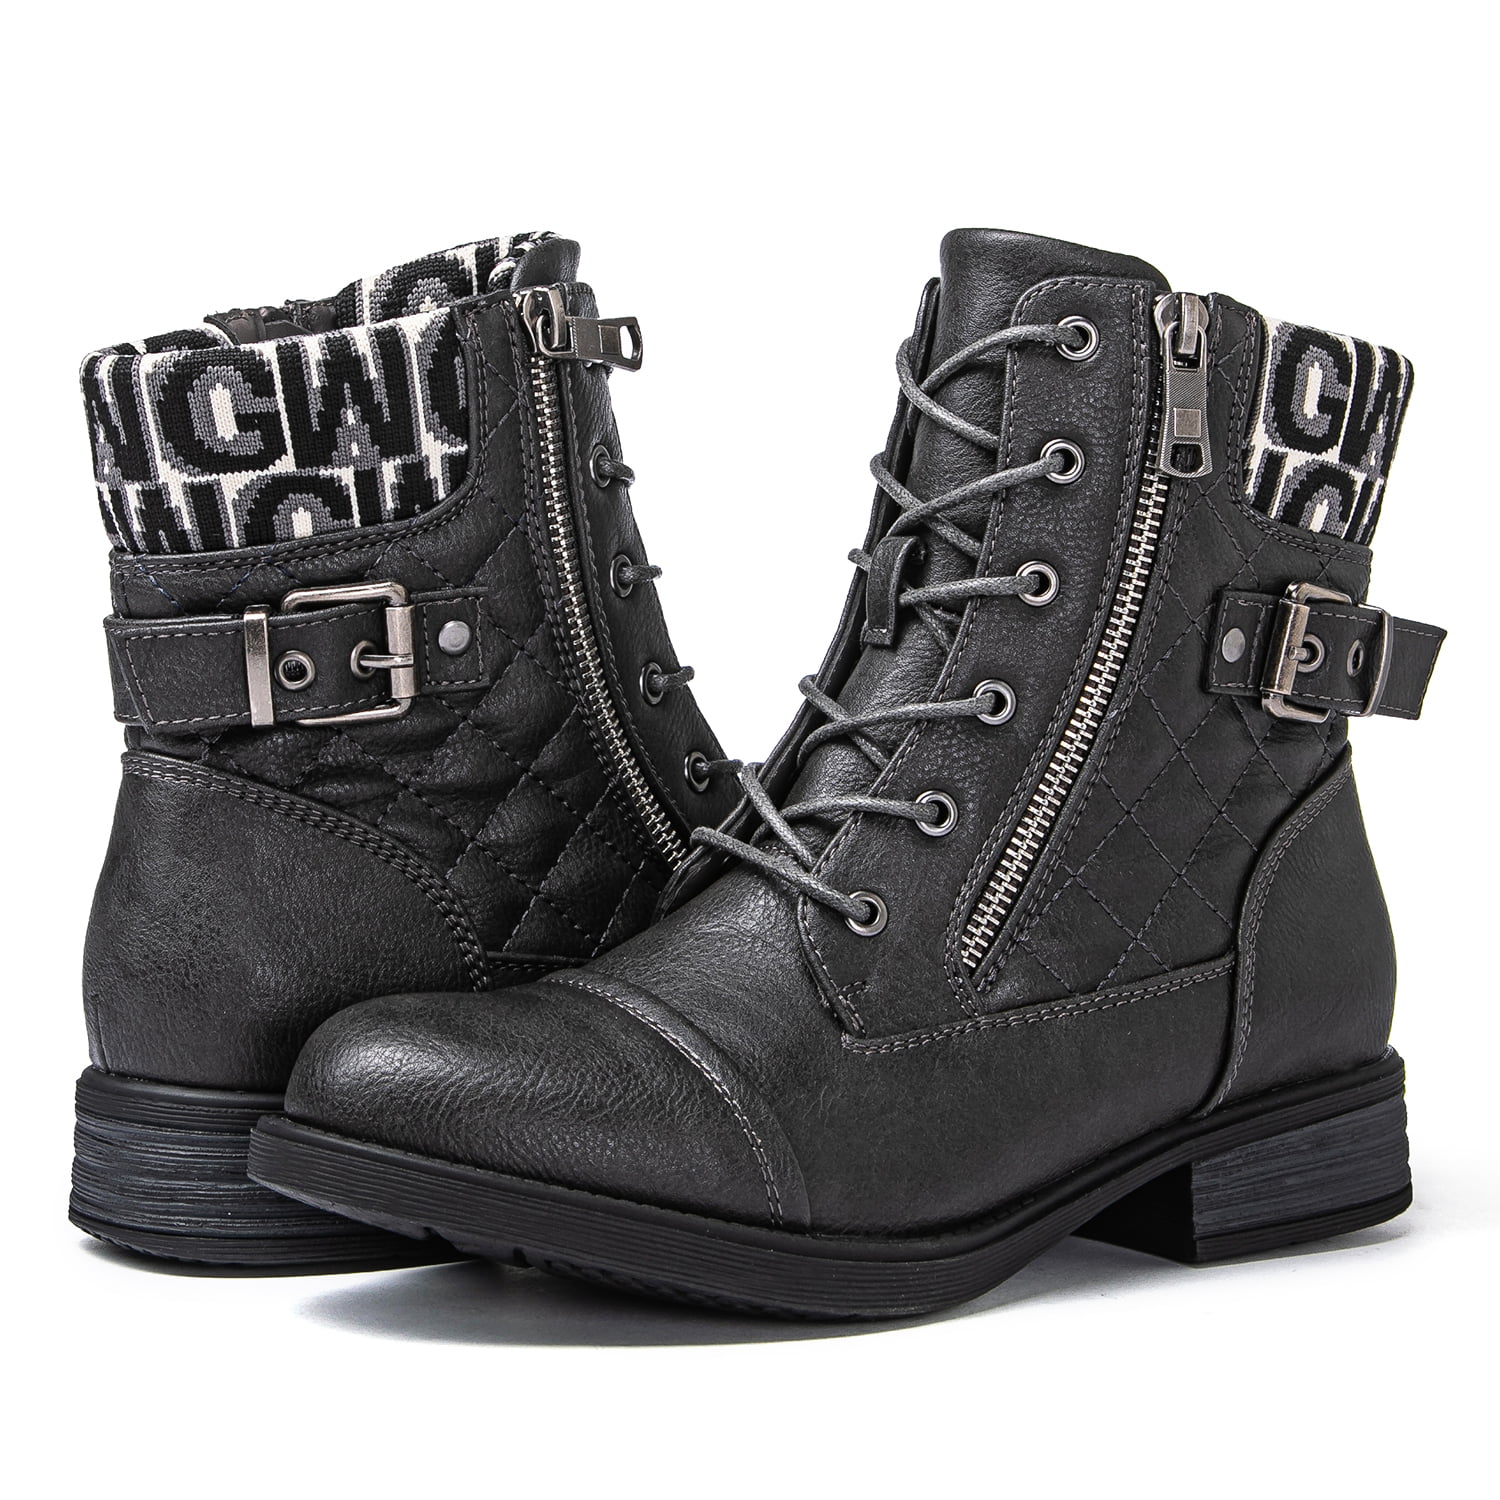 GLOBALWIN Women's Lace-up Ankle Bootie Military Combat Boots 